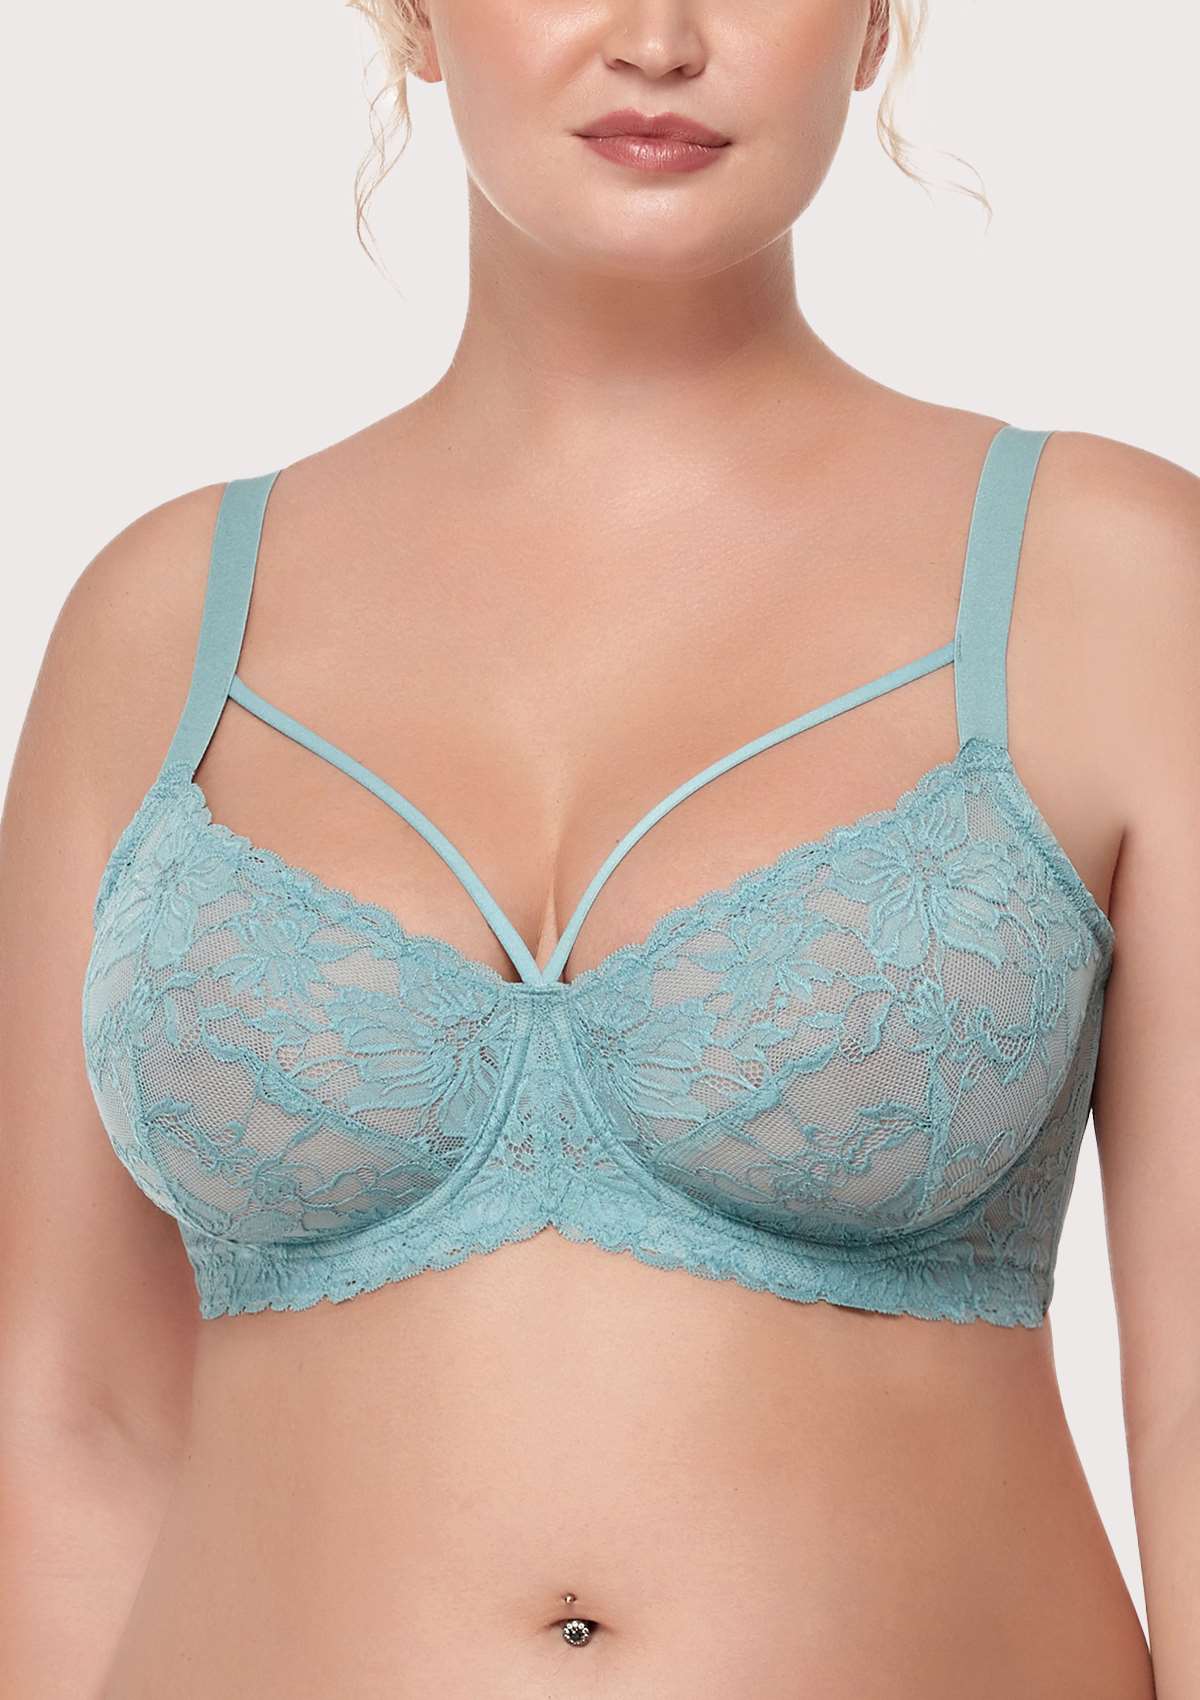 HSIA Pretty In Petals Unlined Lace Bra: Comfortable And Supportive Bra - Crystal Blue / 36 / D